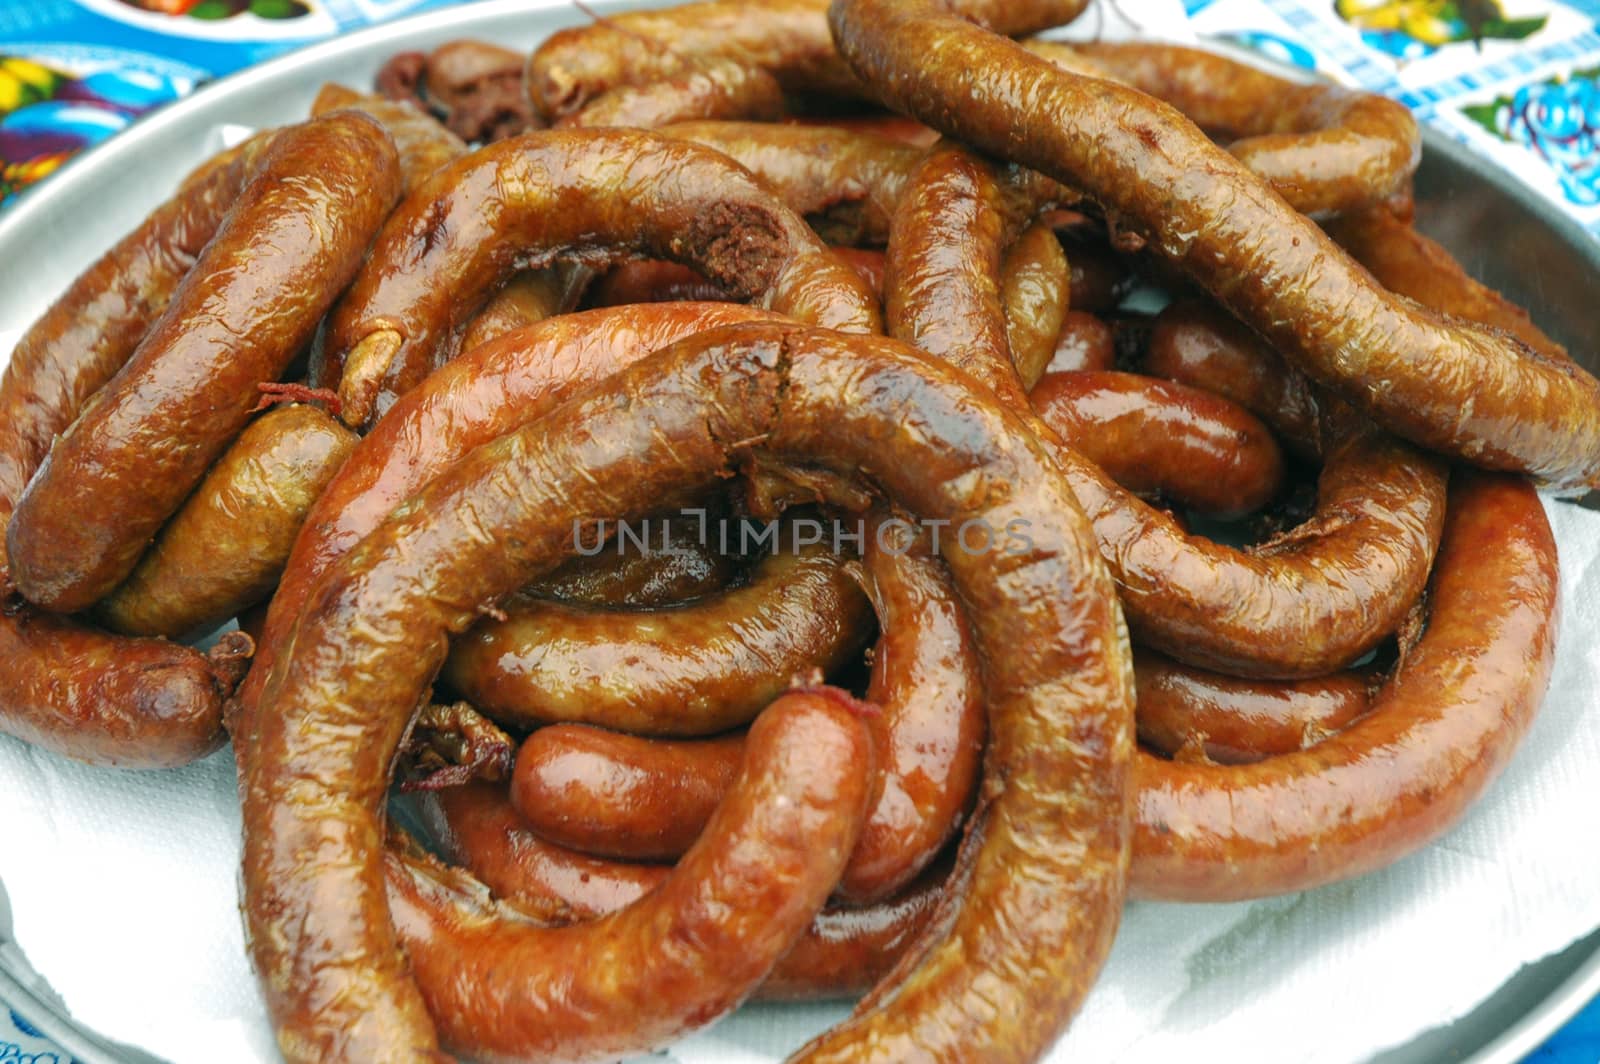 sausage is a cylindrical meat product usually made from ground meat, often pork, beef or veal, along with salt, spices and other flavourings and breadcrumbs, with a skin around it. Typically, a sausage is formed in a casing traditionally made from intestine, but sometimes from synthetic materials